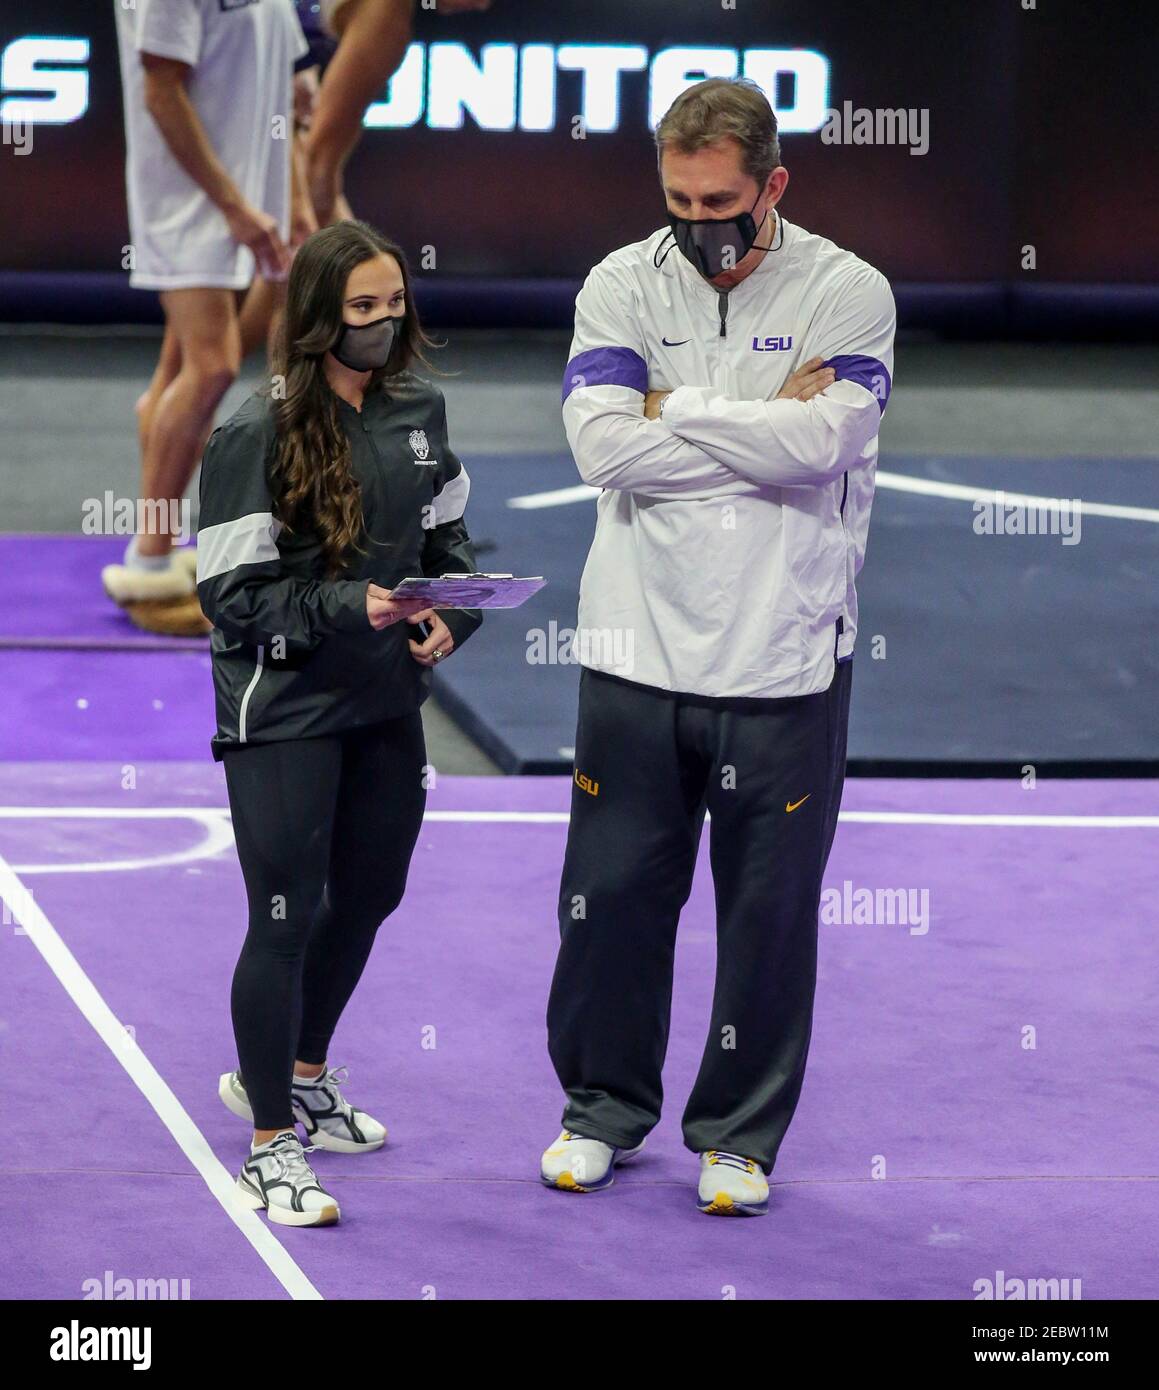 Baton Rouge, LA, USA. 22nd Jan, 2021. LSU Head Coach Jay Clark and  Assistant Coach Ashleigh Gnat have a discussion during warmups before NCAA  Gymnastics action between the #1 ranked Florida Gators